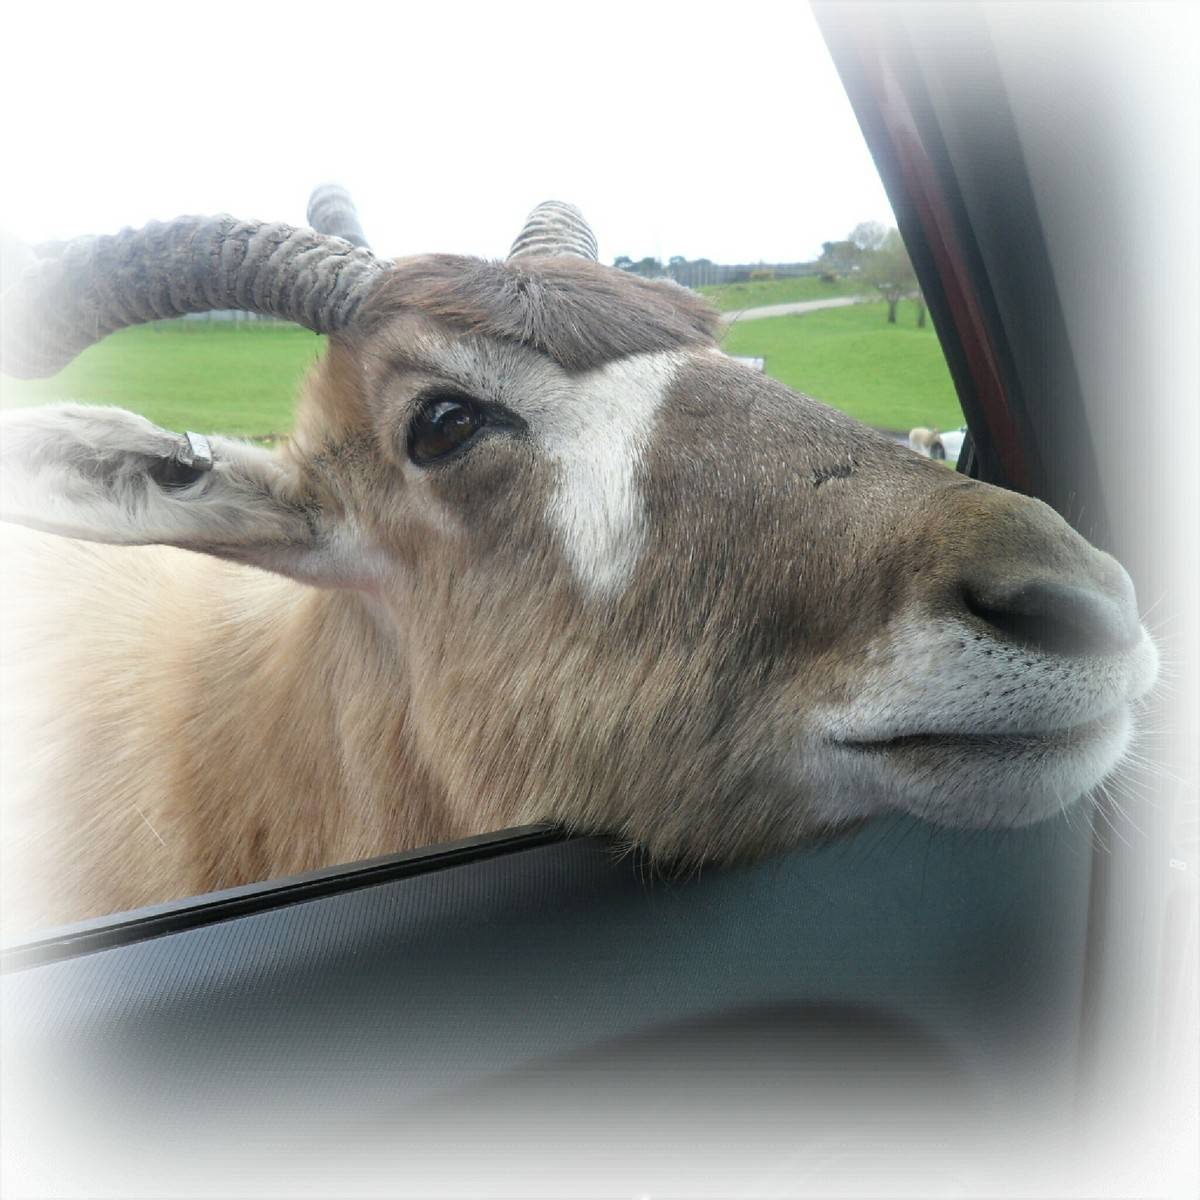 West Midlands Safari Park: An honest review - I was not asked to review this attraction and I have shared the negative points as well as the positive.